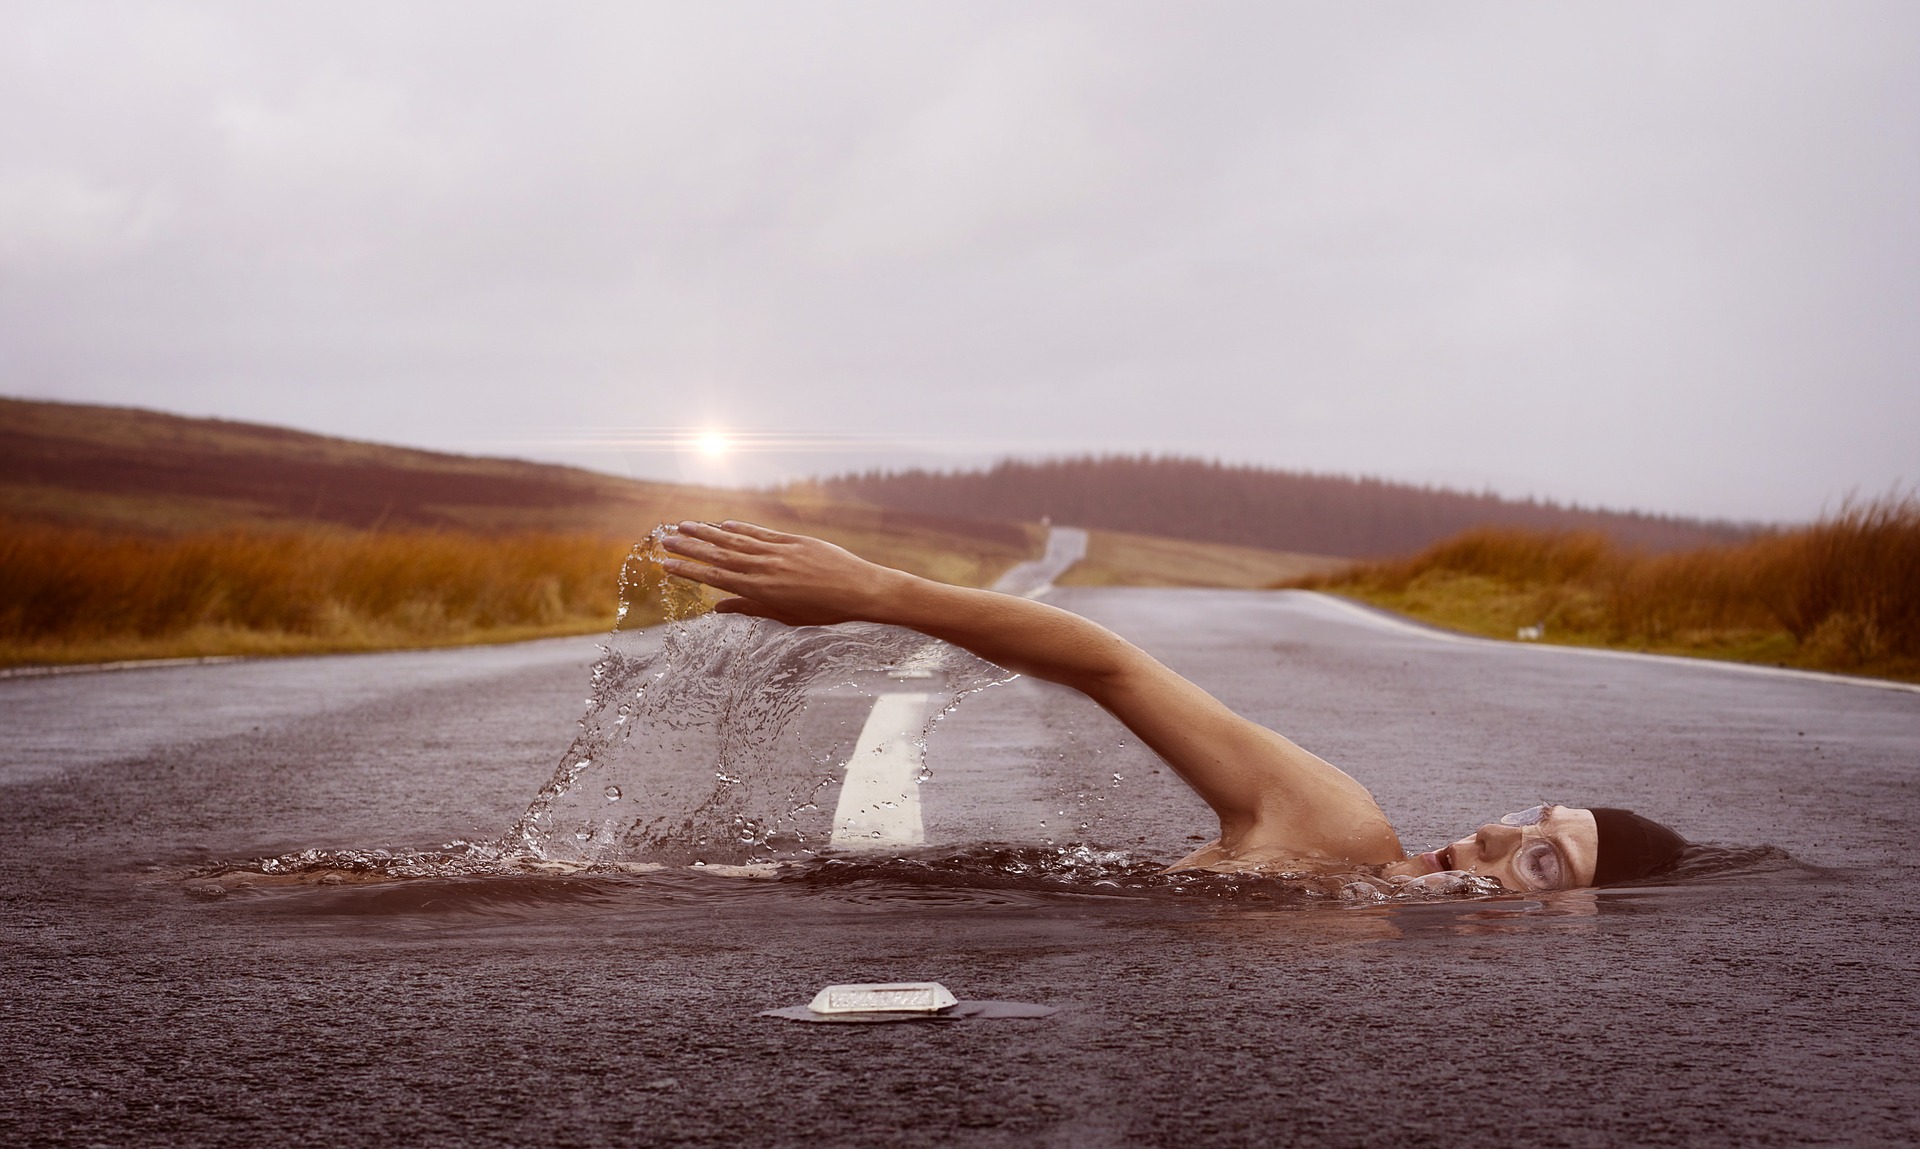 Image of Someone Swimming in a Road